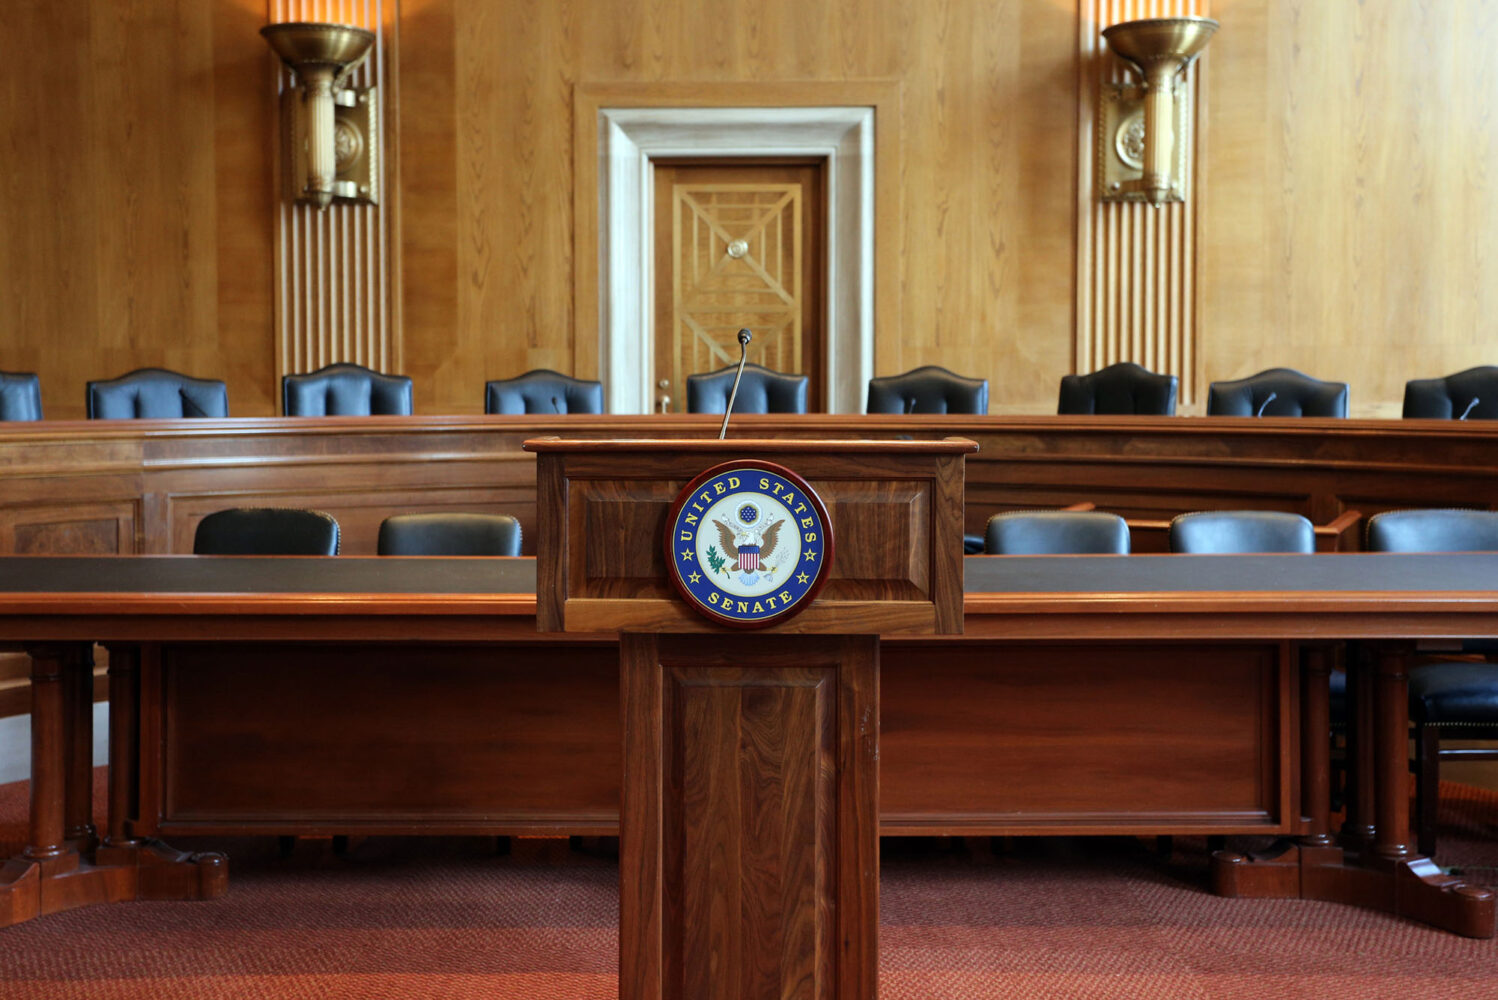 Photo: A picture of a podium with the words "United States Senate" on it. Behind the podium there are tables and chairs